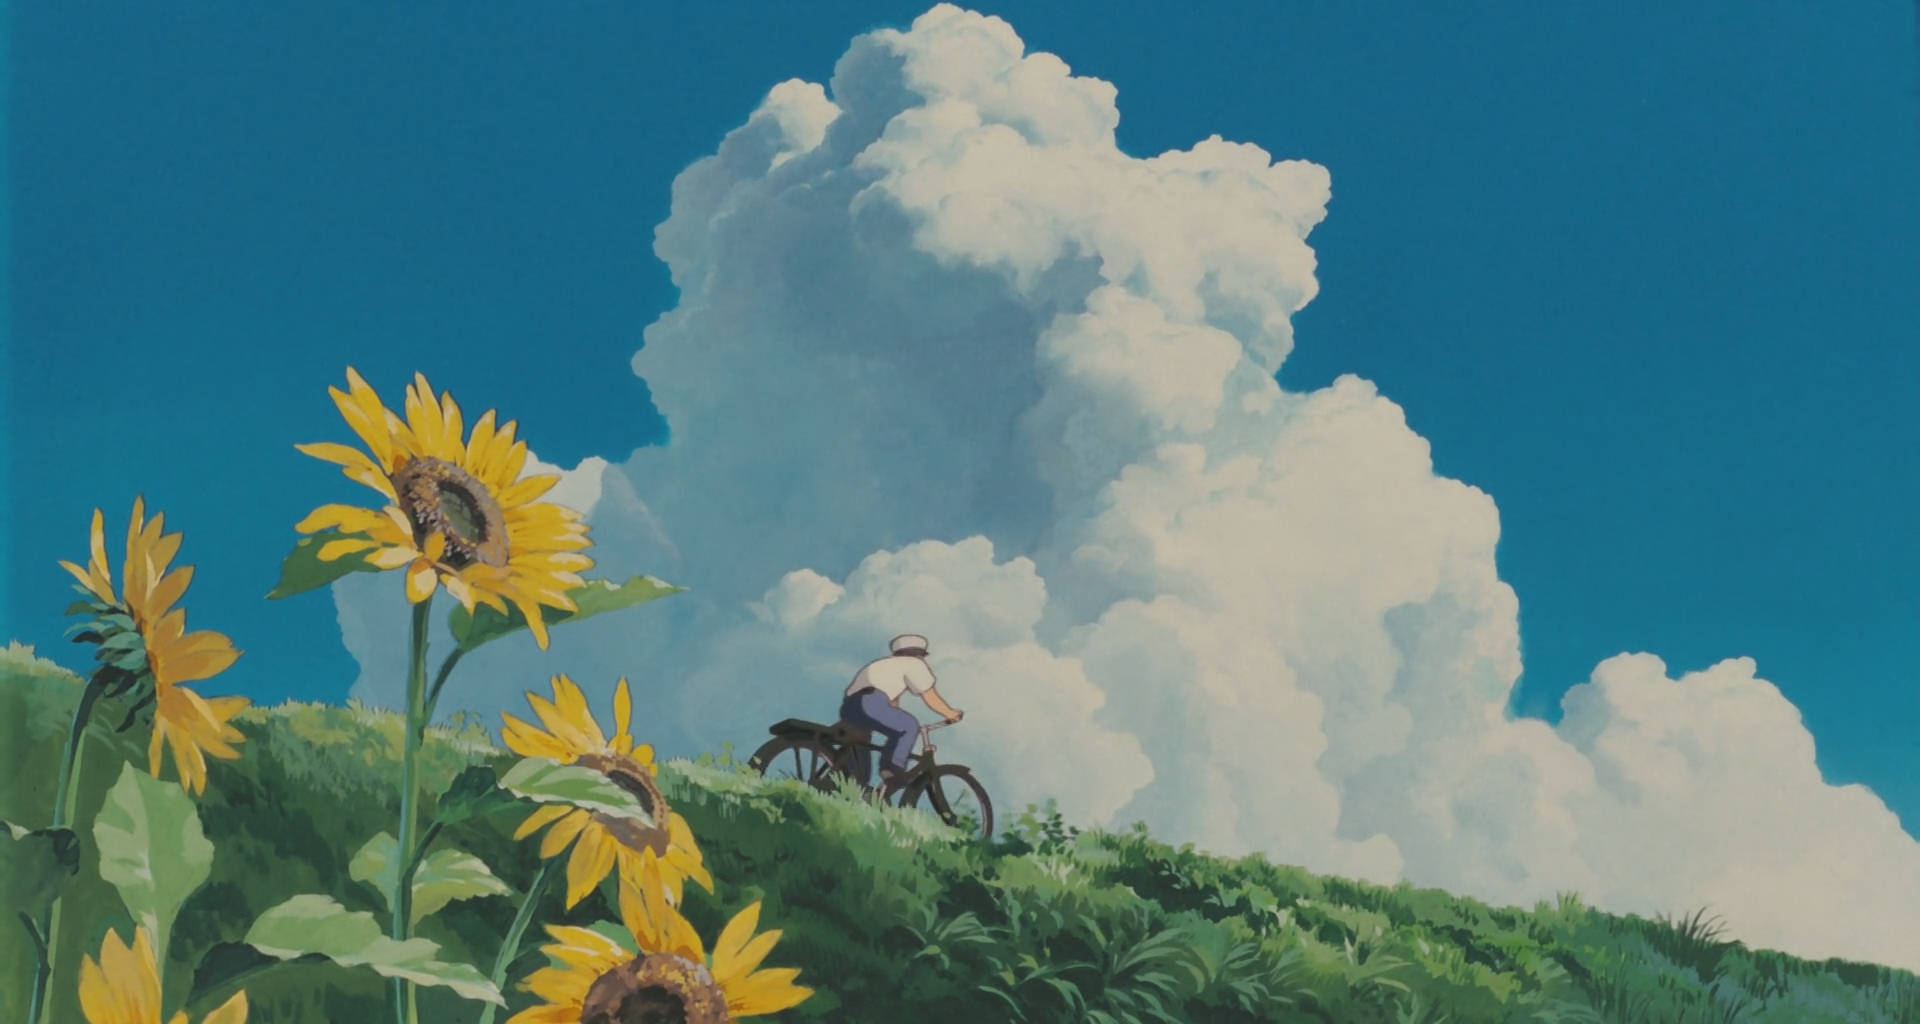 Tranquil Studio Ghibli Scenery with Blooming Sunflowers Wallpaper